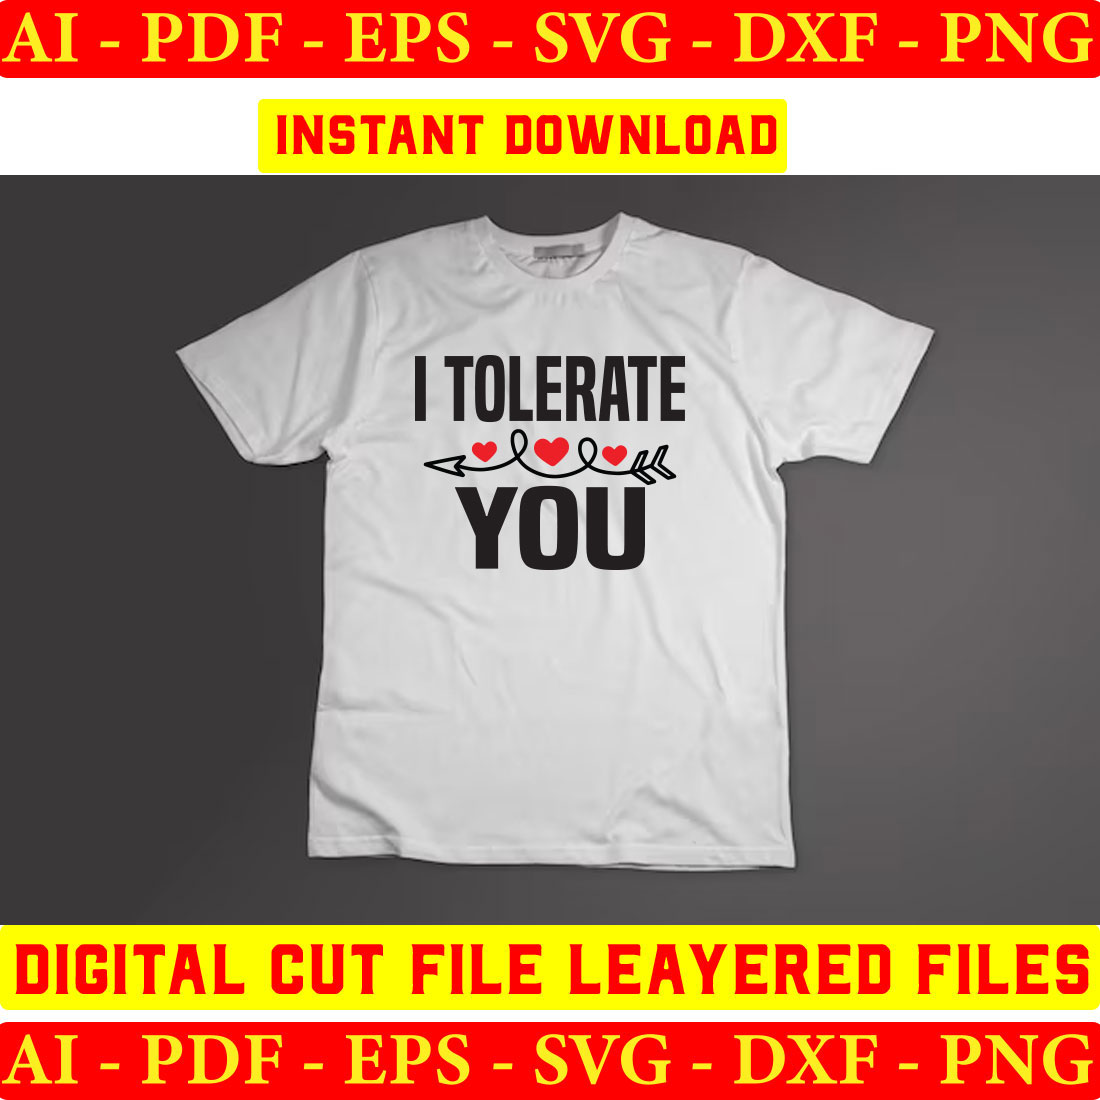 White t - shirt with the words i tolerate you on it.